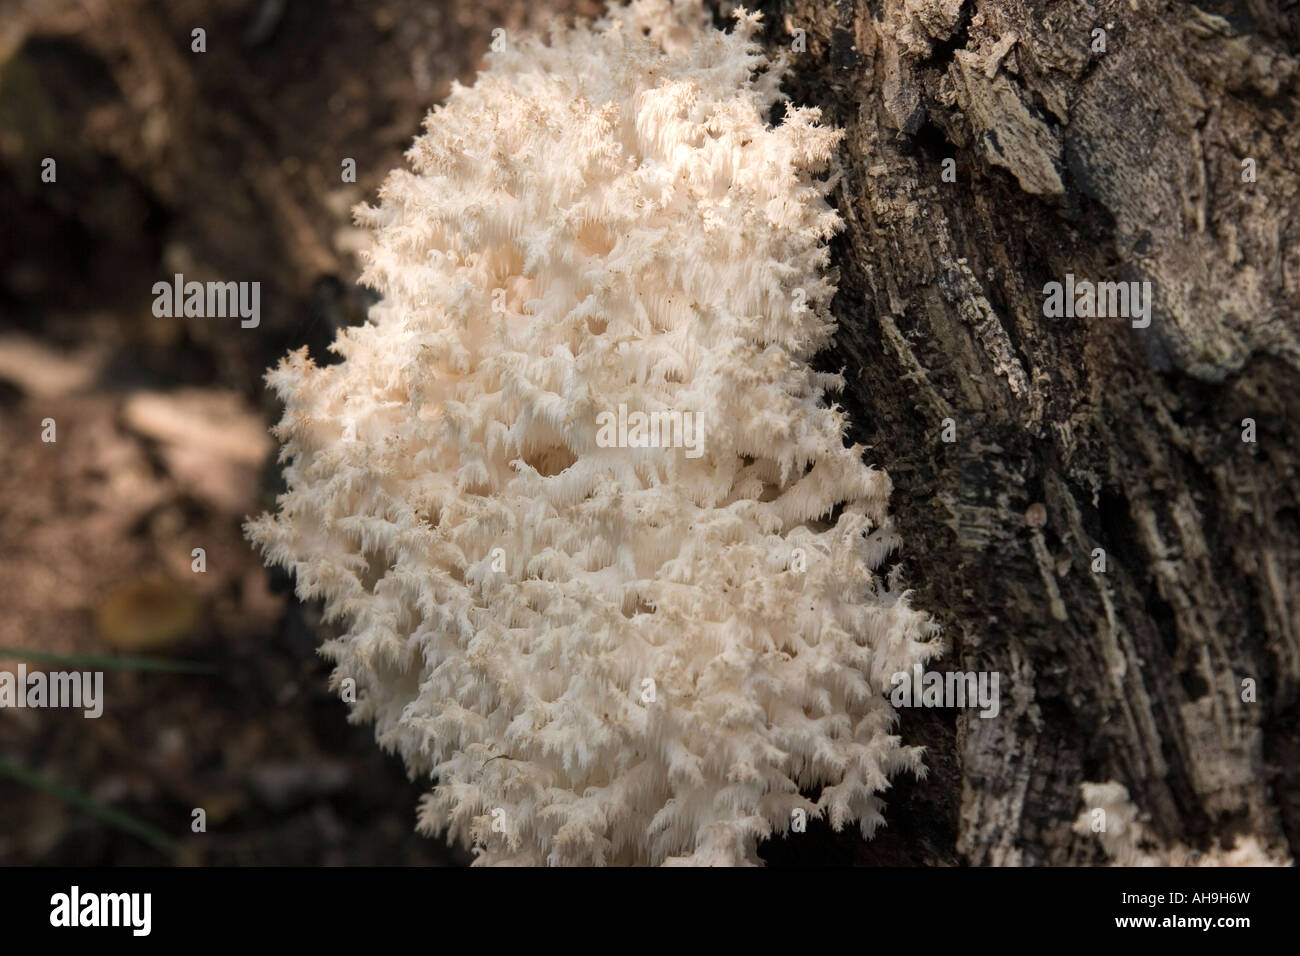 Autumn in the Netherlands. White fungus on a tree. Stock Photo